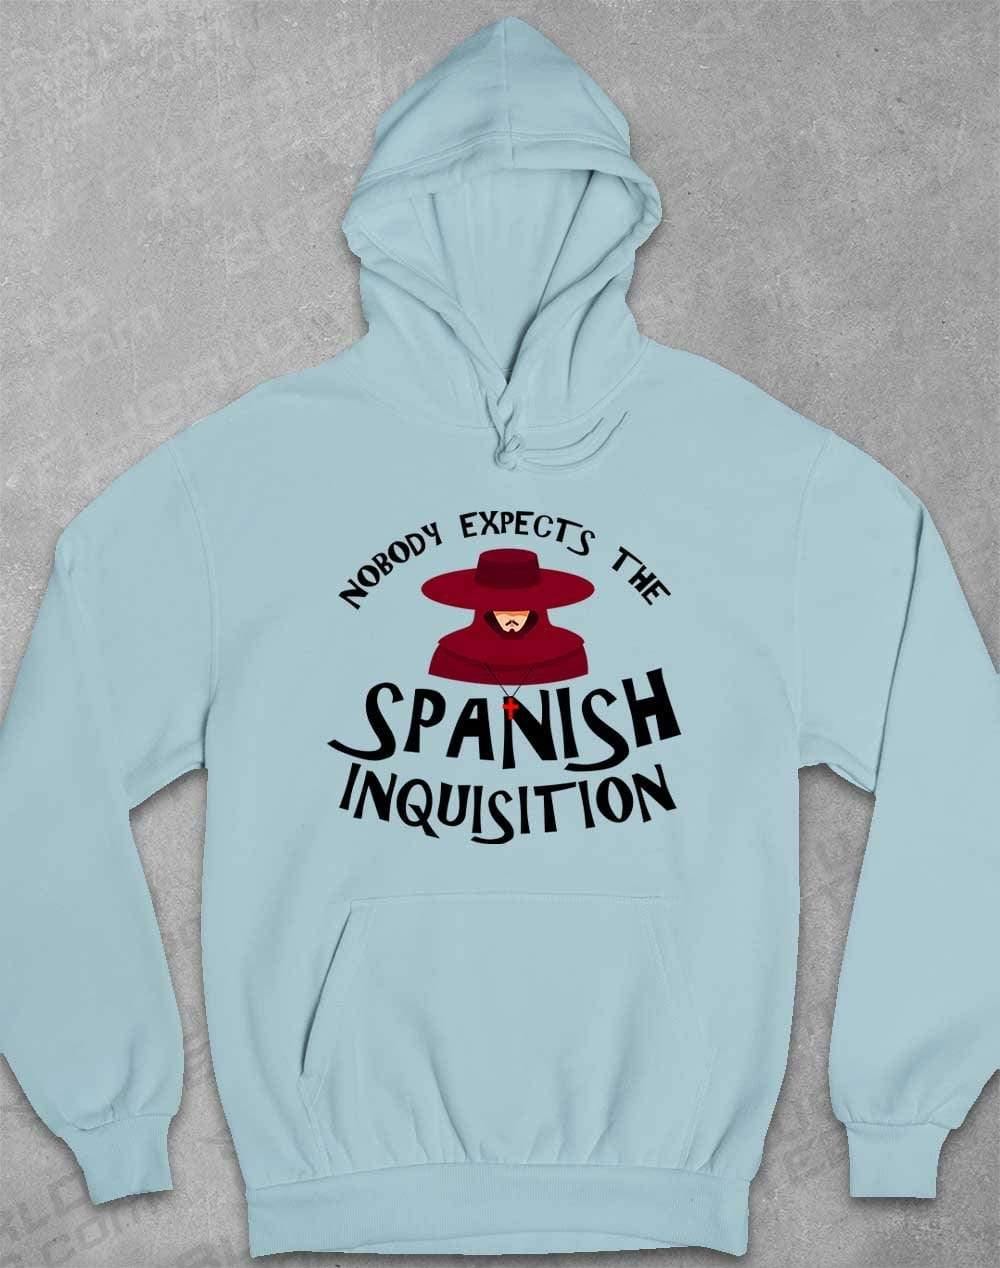 Nobody Expects the Spanish Inquisition Hoodie XS / Sky Blue  - Off World Tees